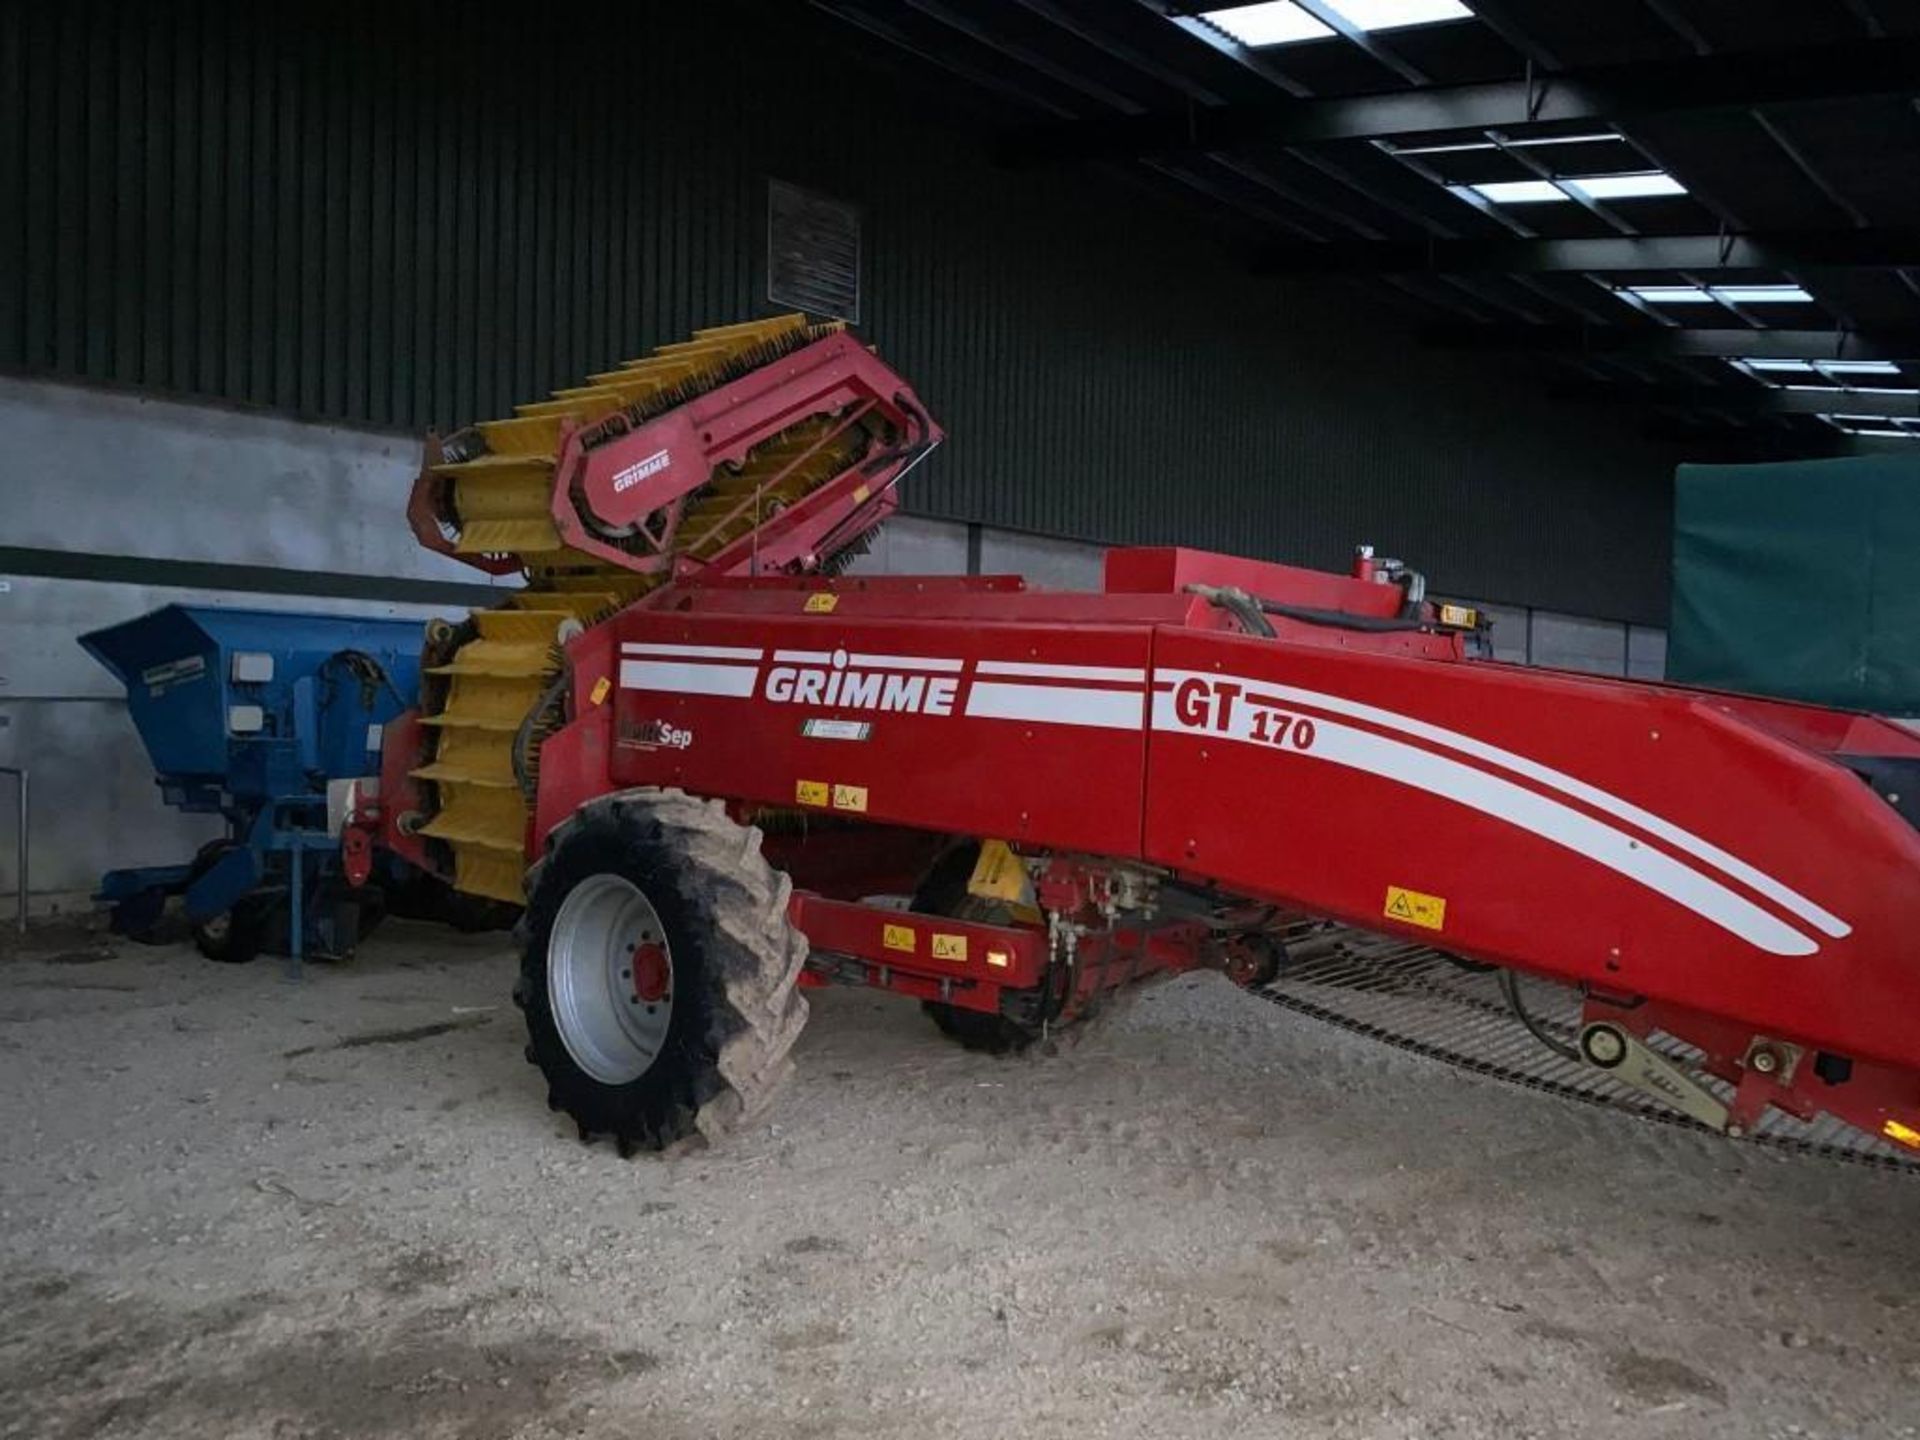 Grimme GT 170 2011 - Image 2 of 10